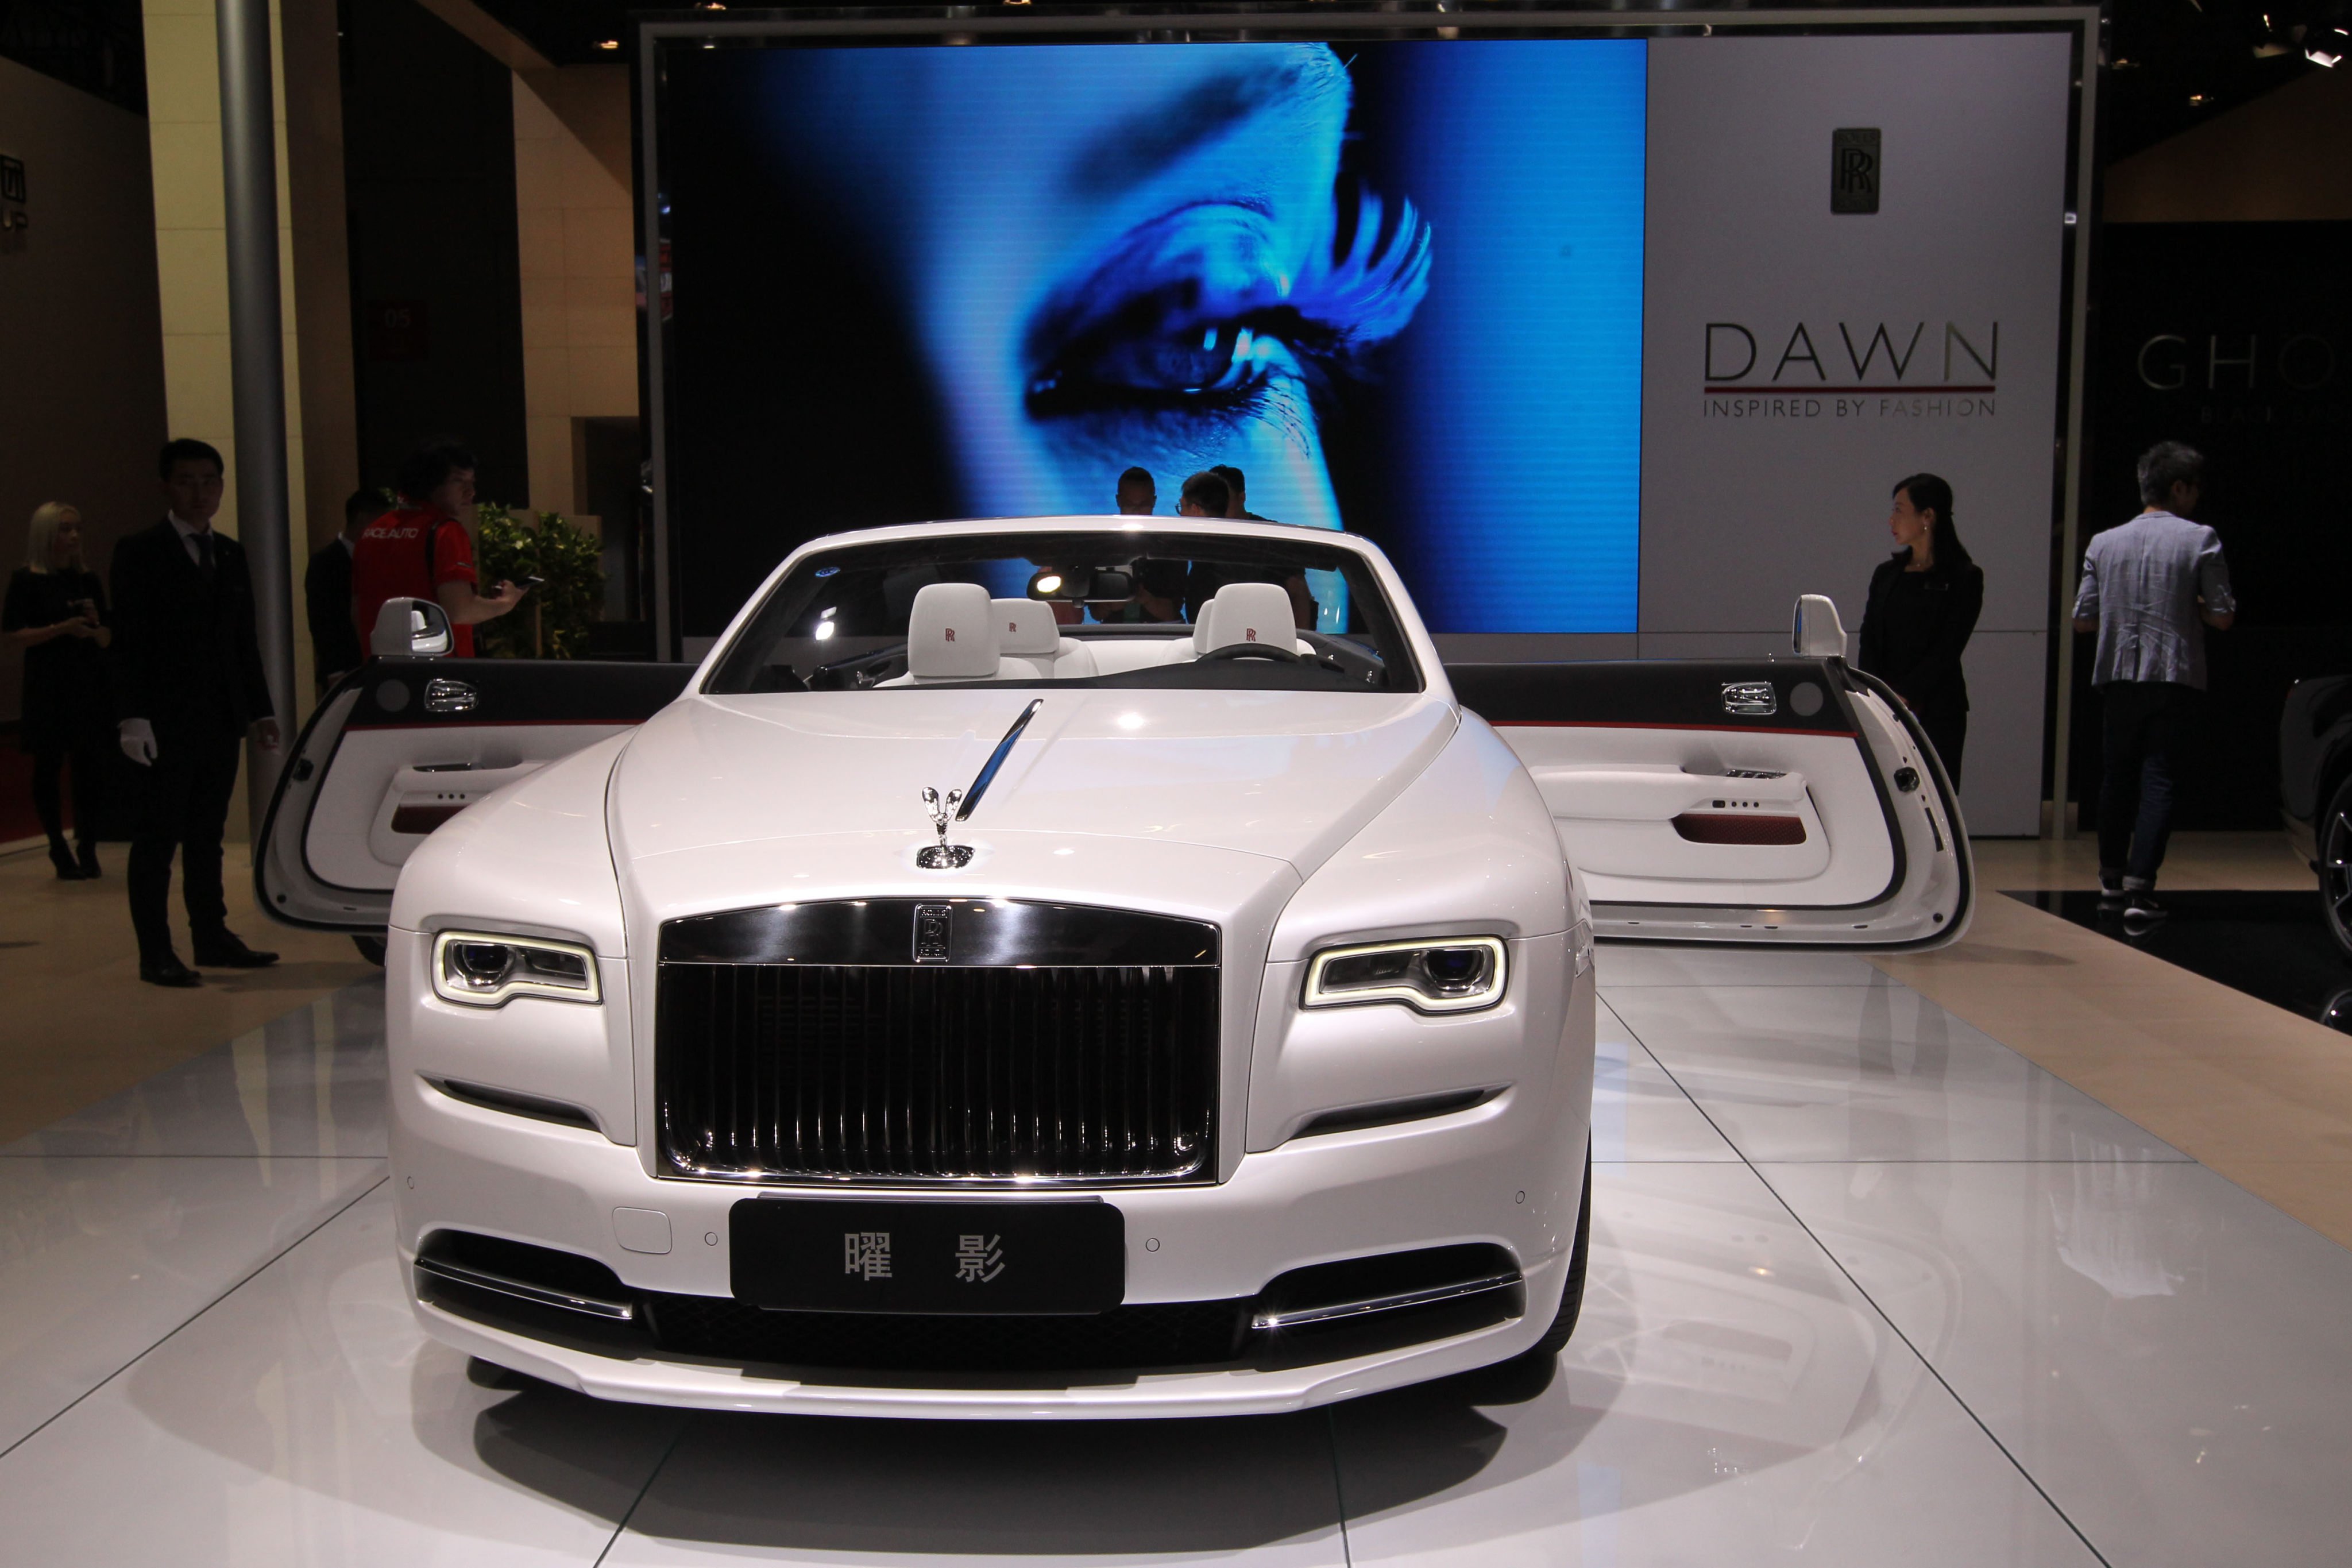 A Rolls-Royce Dawn is seen at the 17th Shanghai International Automobile Industry Exhibition in 2017. Liu fooled a car dealership into believing that his mother had authorised the sale of her Rolls-Royce Dawn 6.6 V12, according to court records. Photo: Simon Song